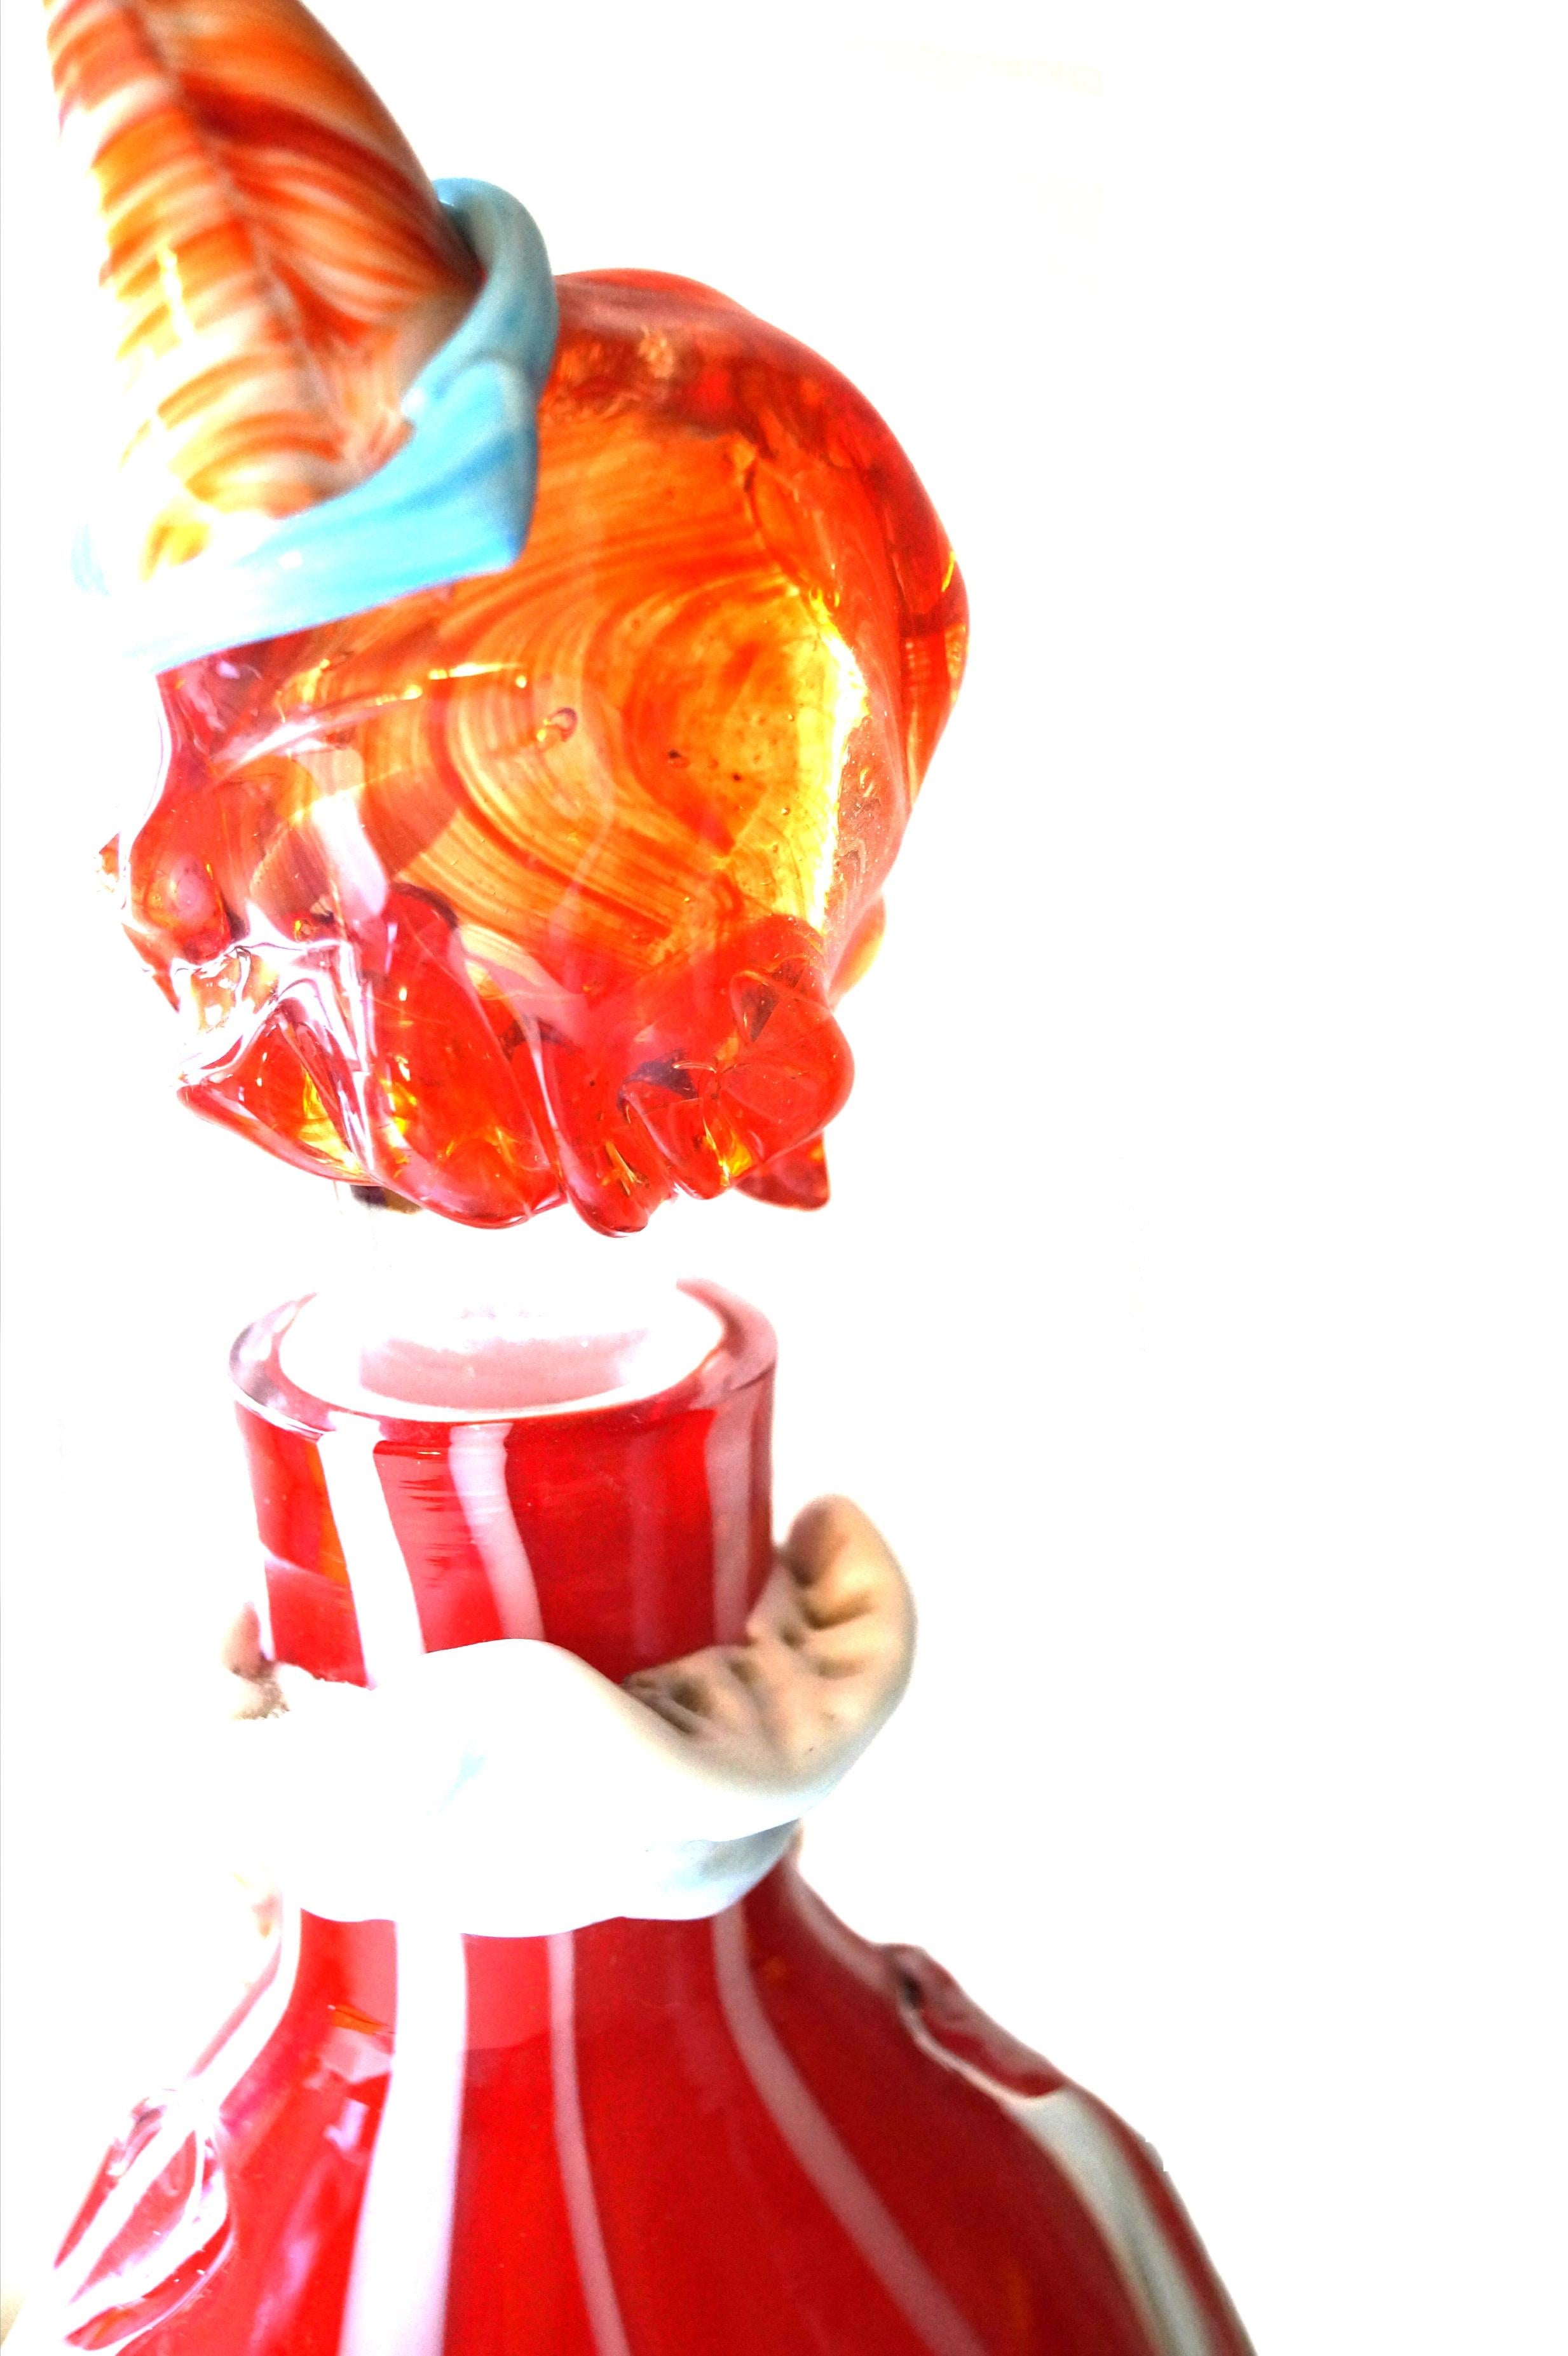 Mid-20th Century Italian Hand Blown Murano Glass Clown Decanter with Stopper Red Orange Black  For Sale